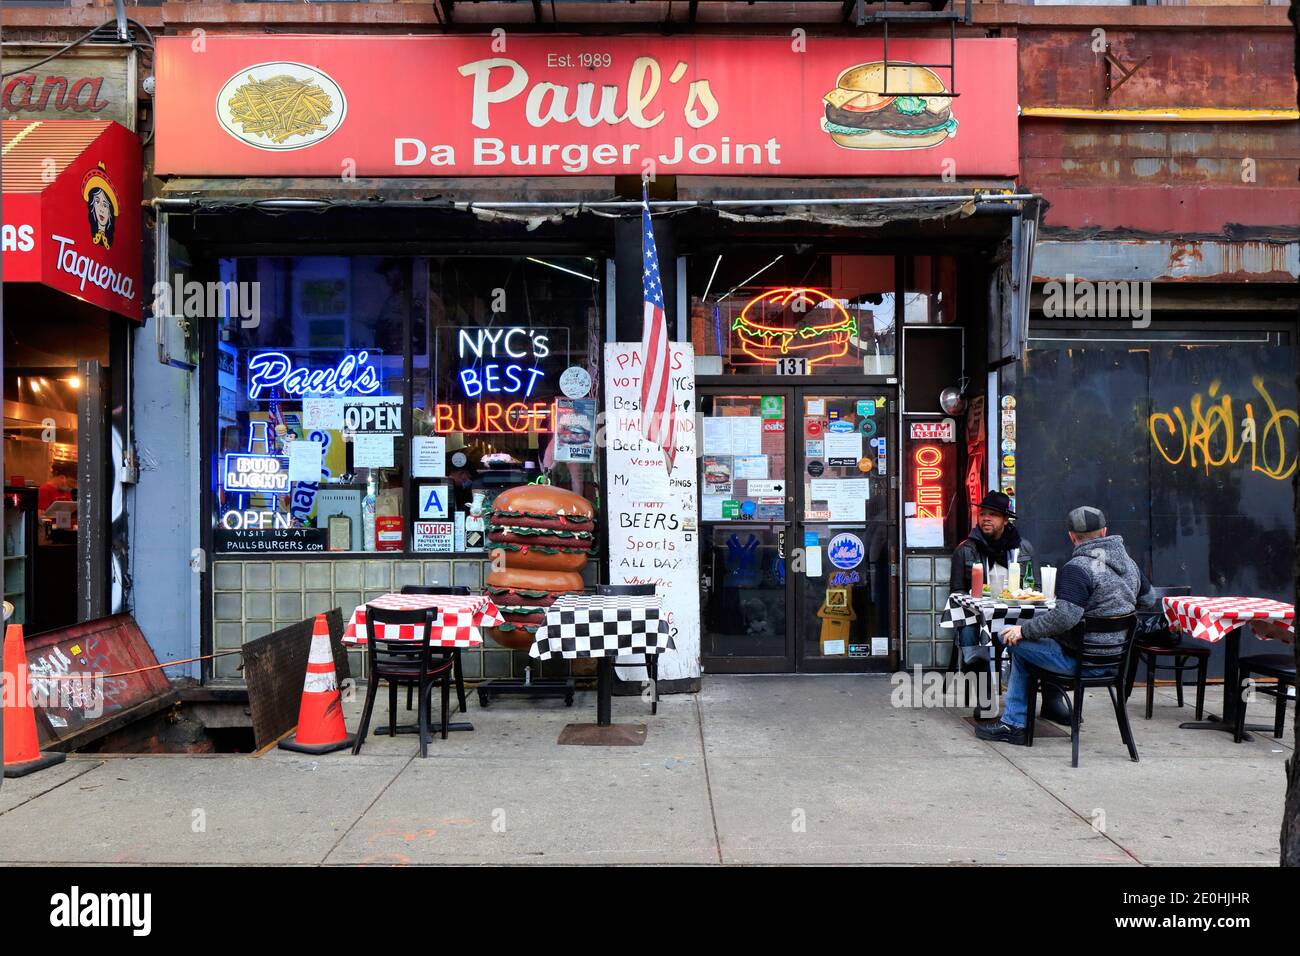 Paul's Da Burger Joint, 131 Second Ave, New York, NY. exterior storefront of a hamburger restaurant in Manhattan's East Village, St. Mark's Place. Stock Photo